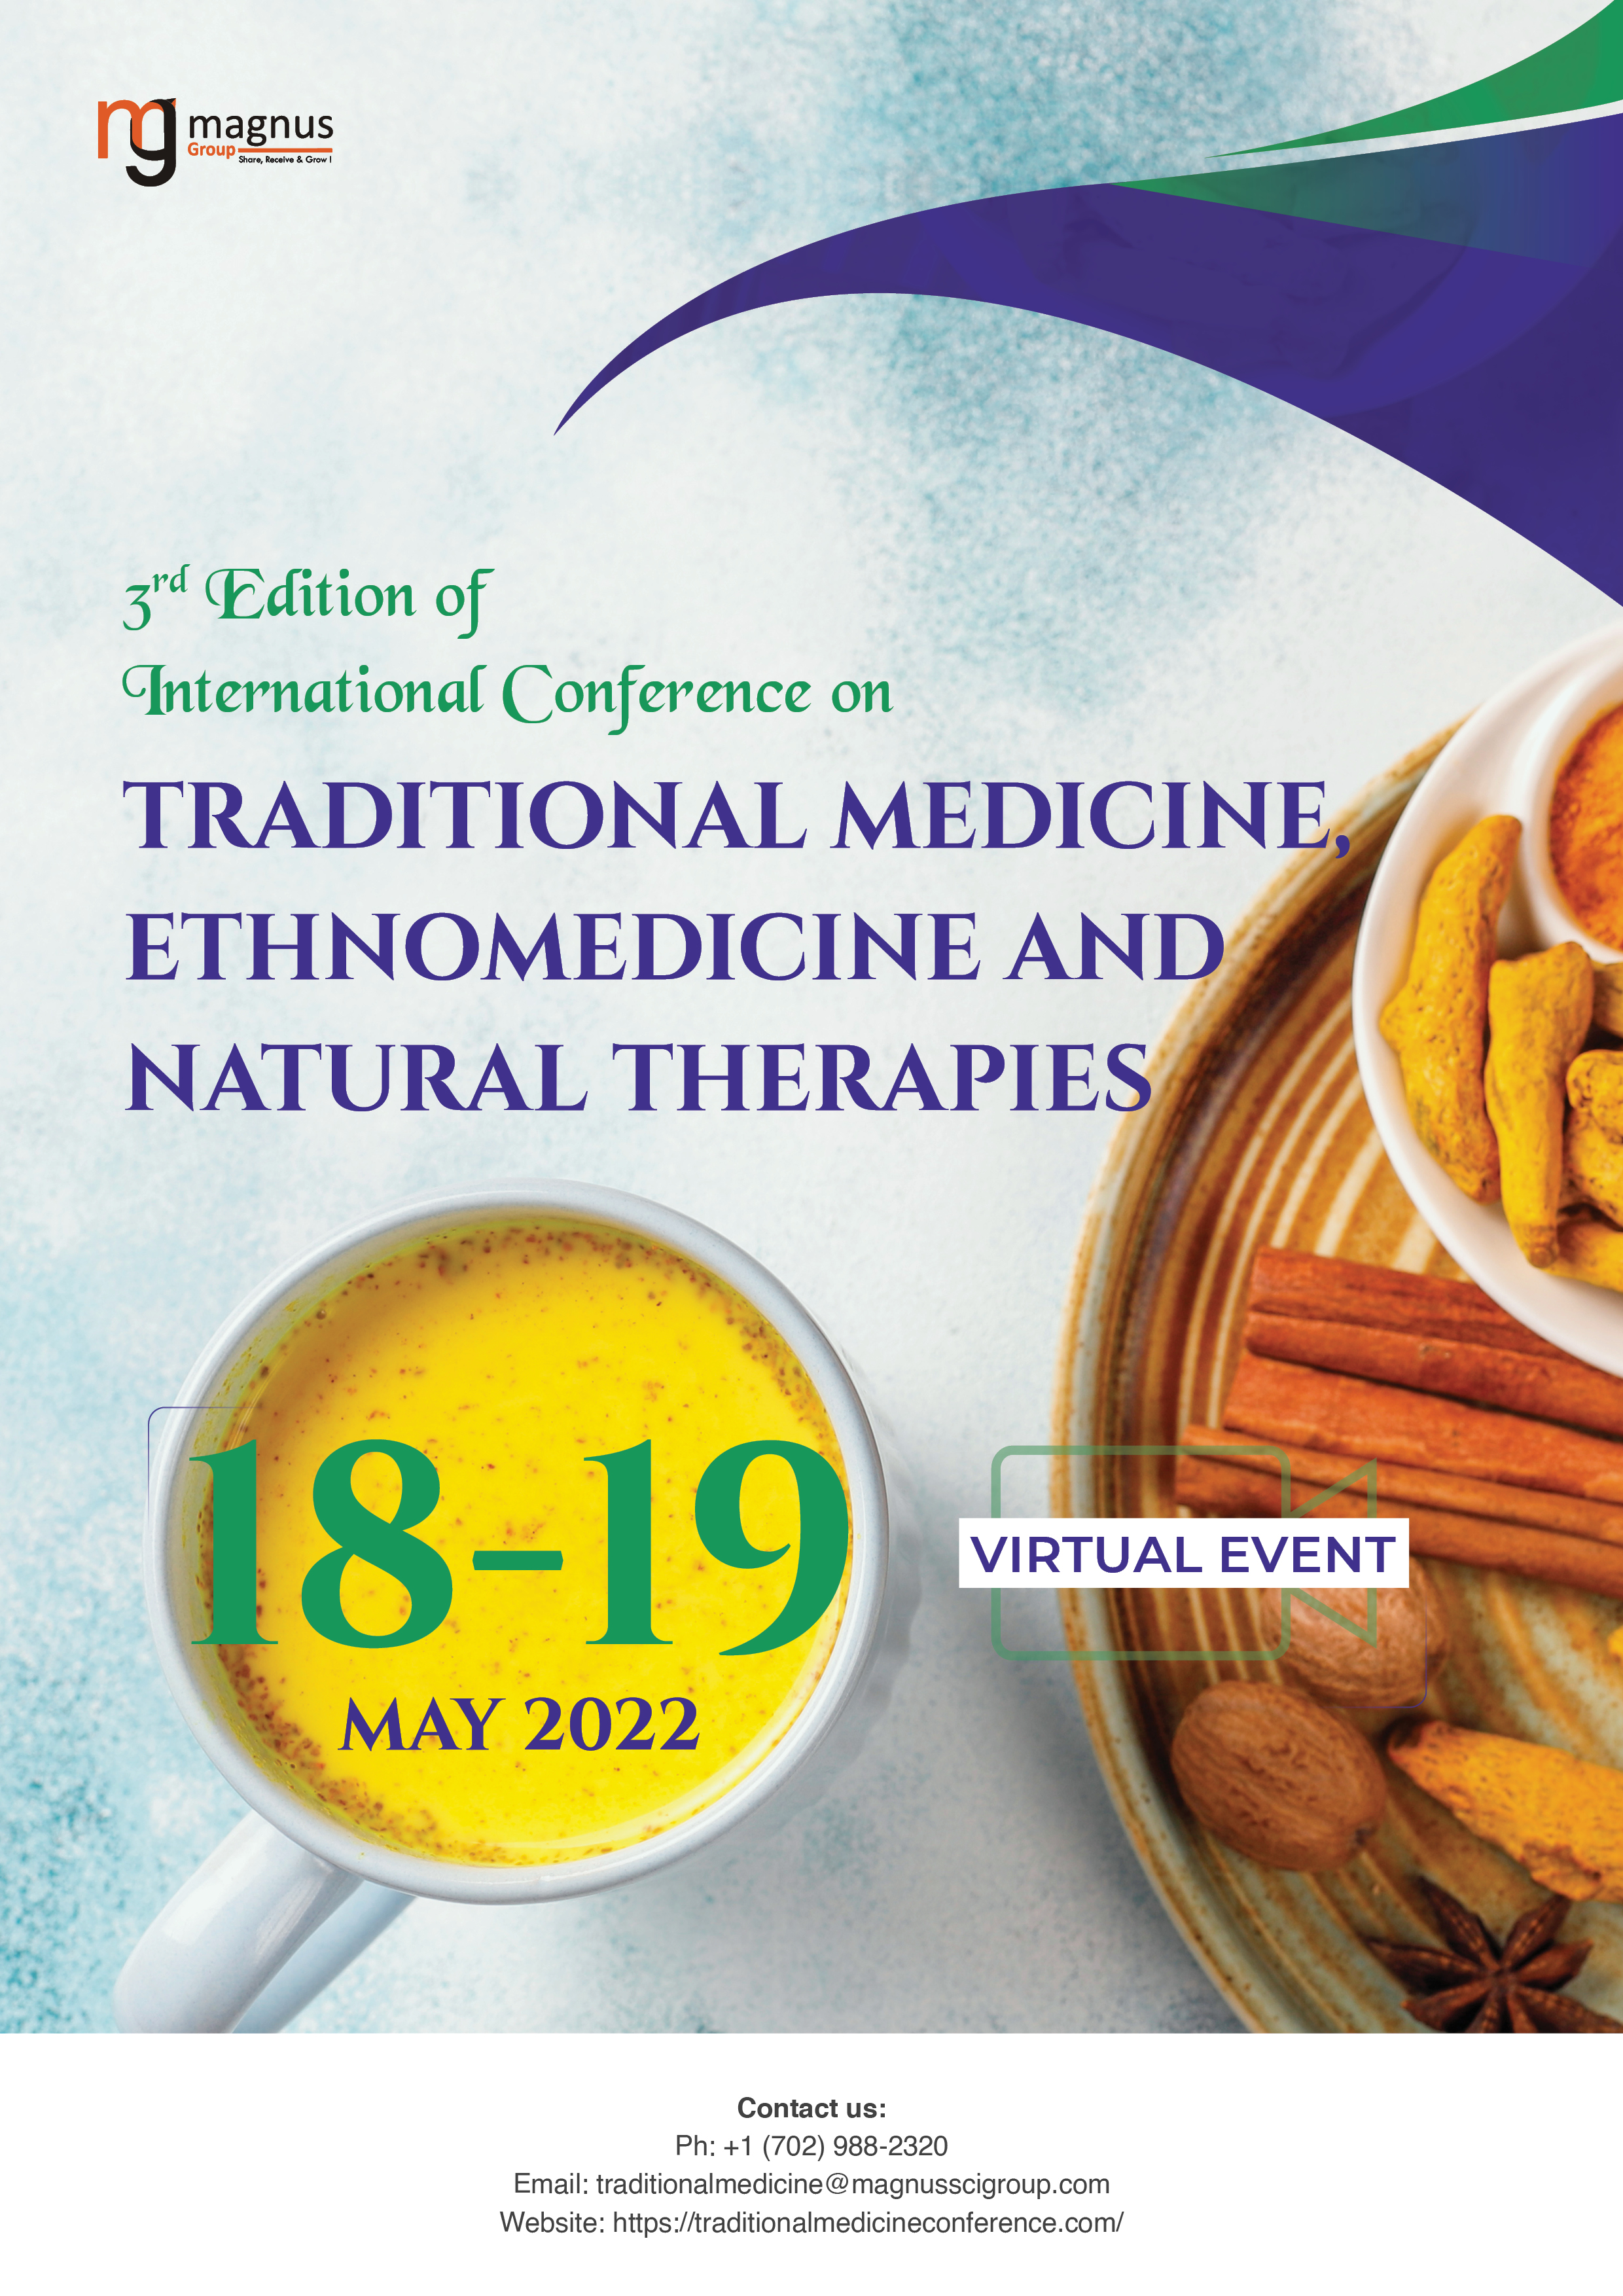 Traditional Medicine, Ethnomedicine and Natural Therapies | Online Event Event Book